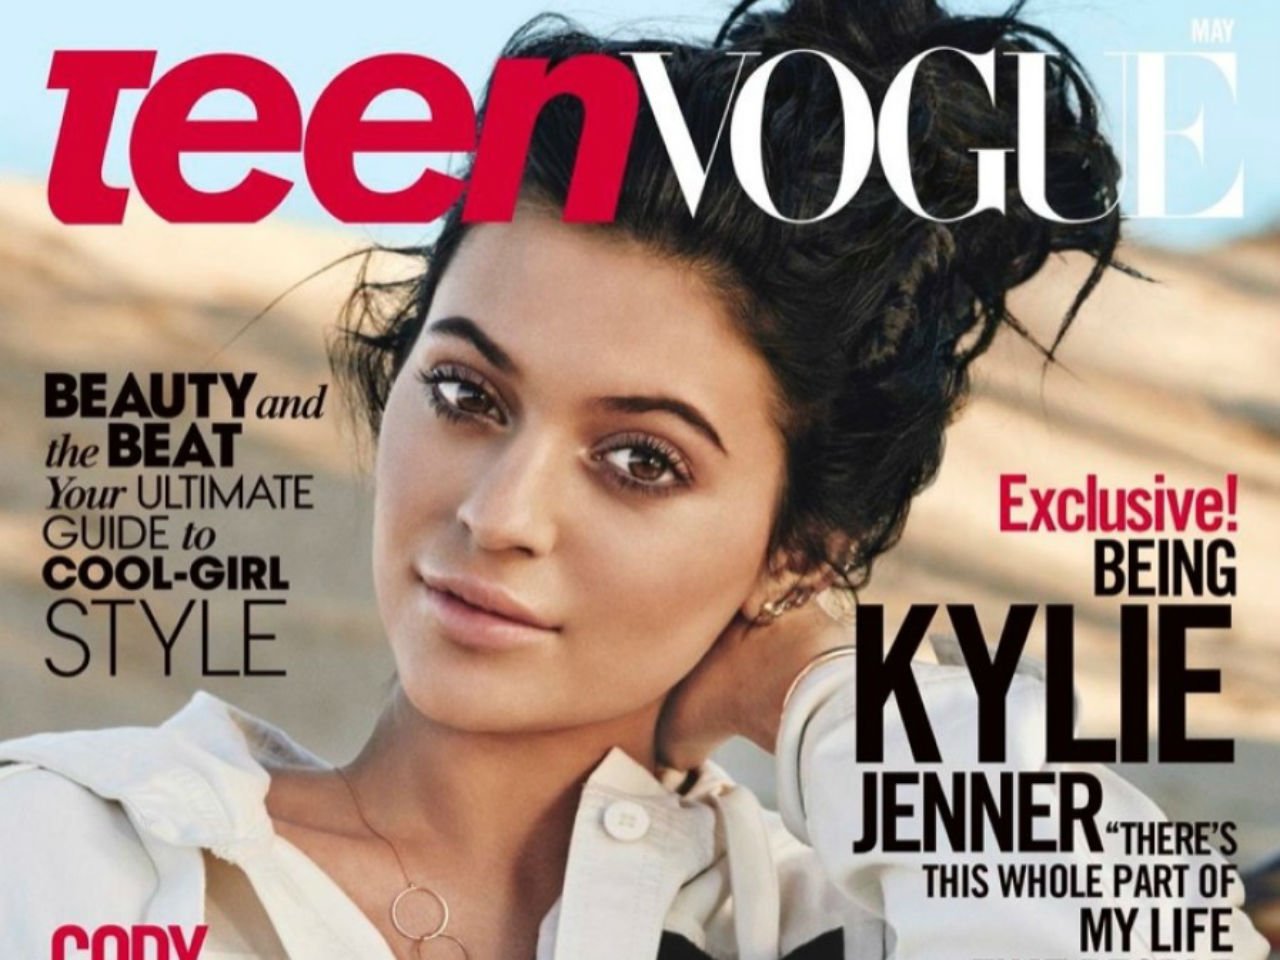 Kylie Jenner's Teen Vogue magazine cover photo 